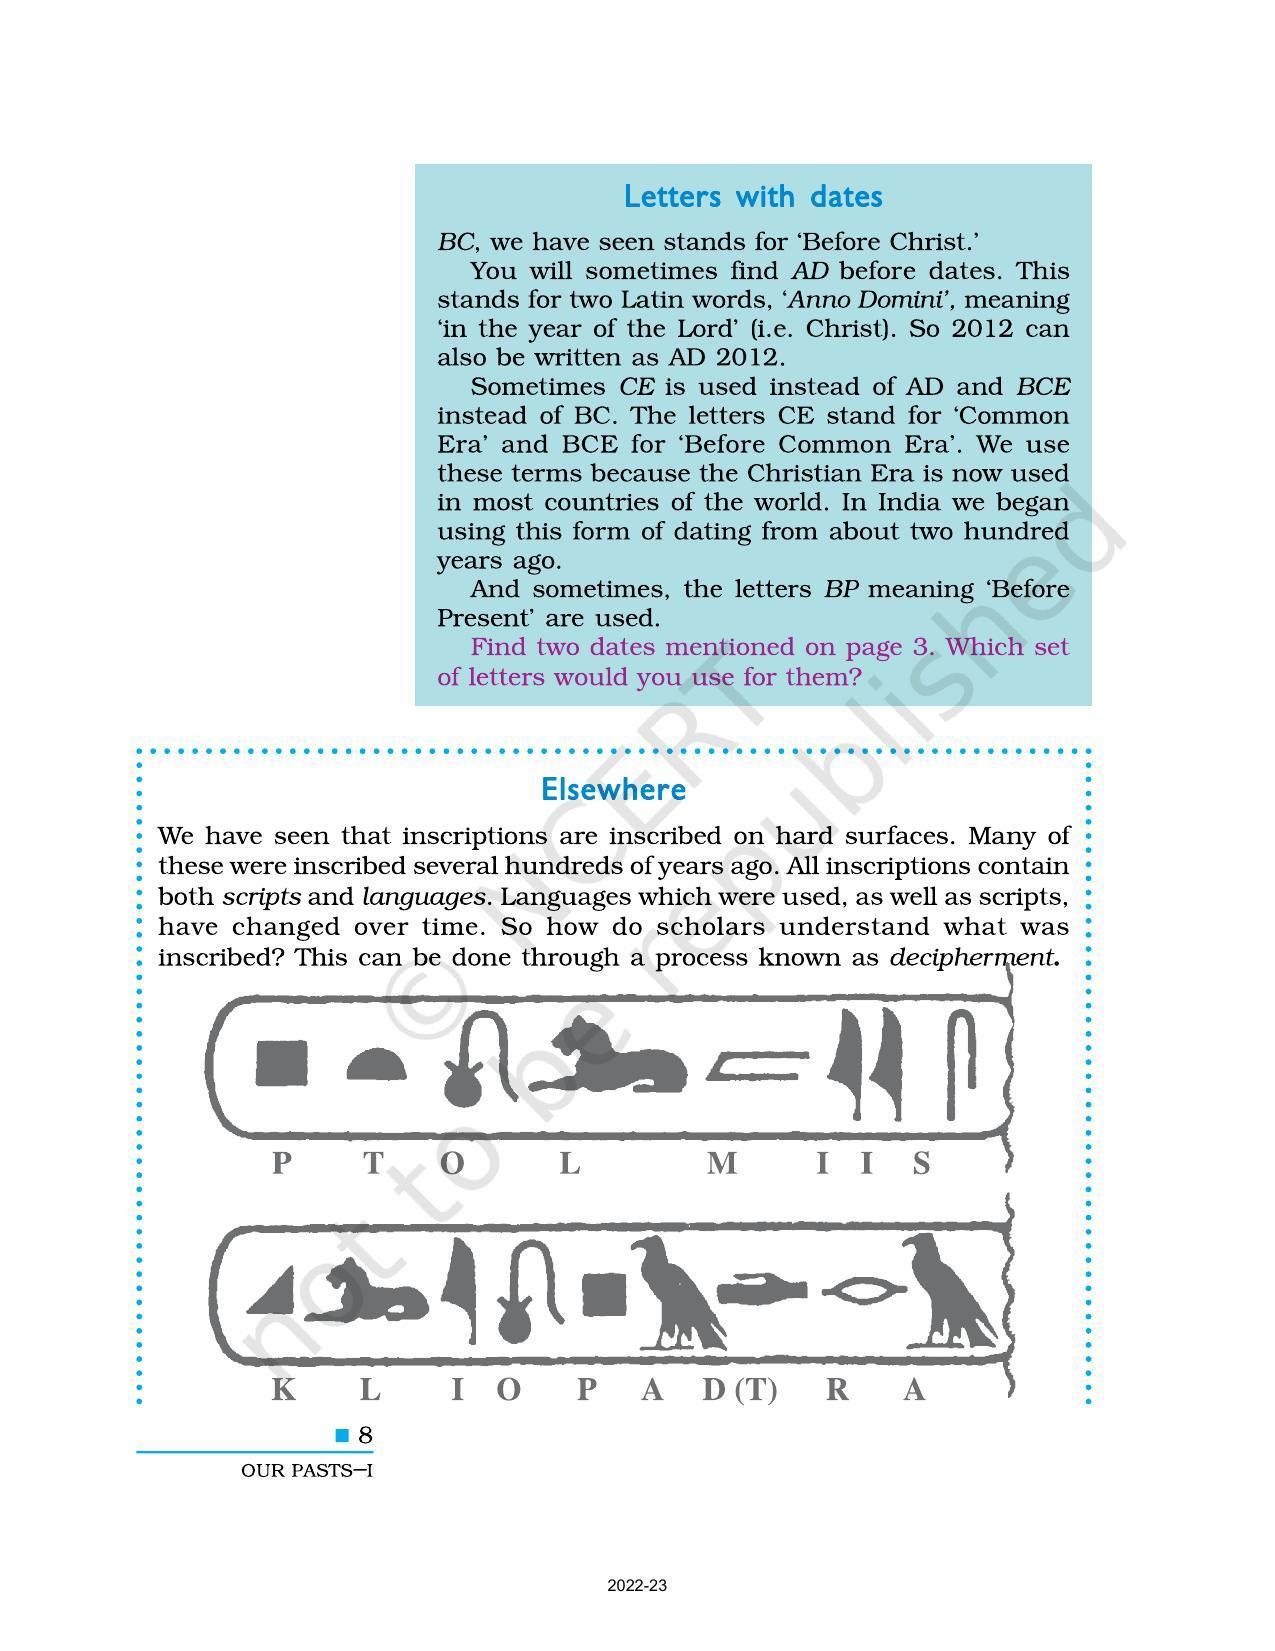 NCERT Book for Class 6 History (Social Science) : Chapter 1-What Where, How, and When? - Page 8